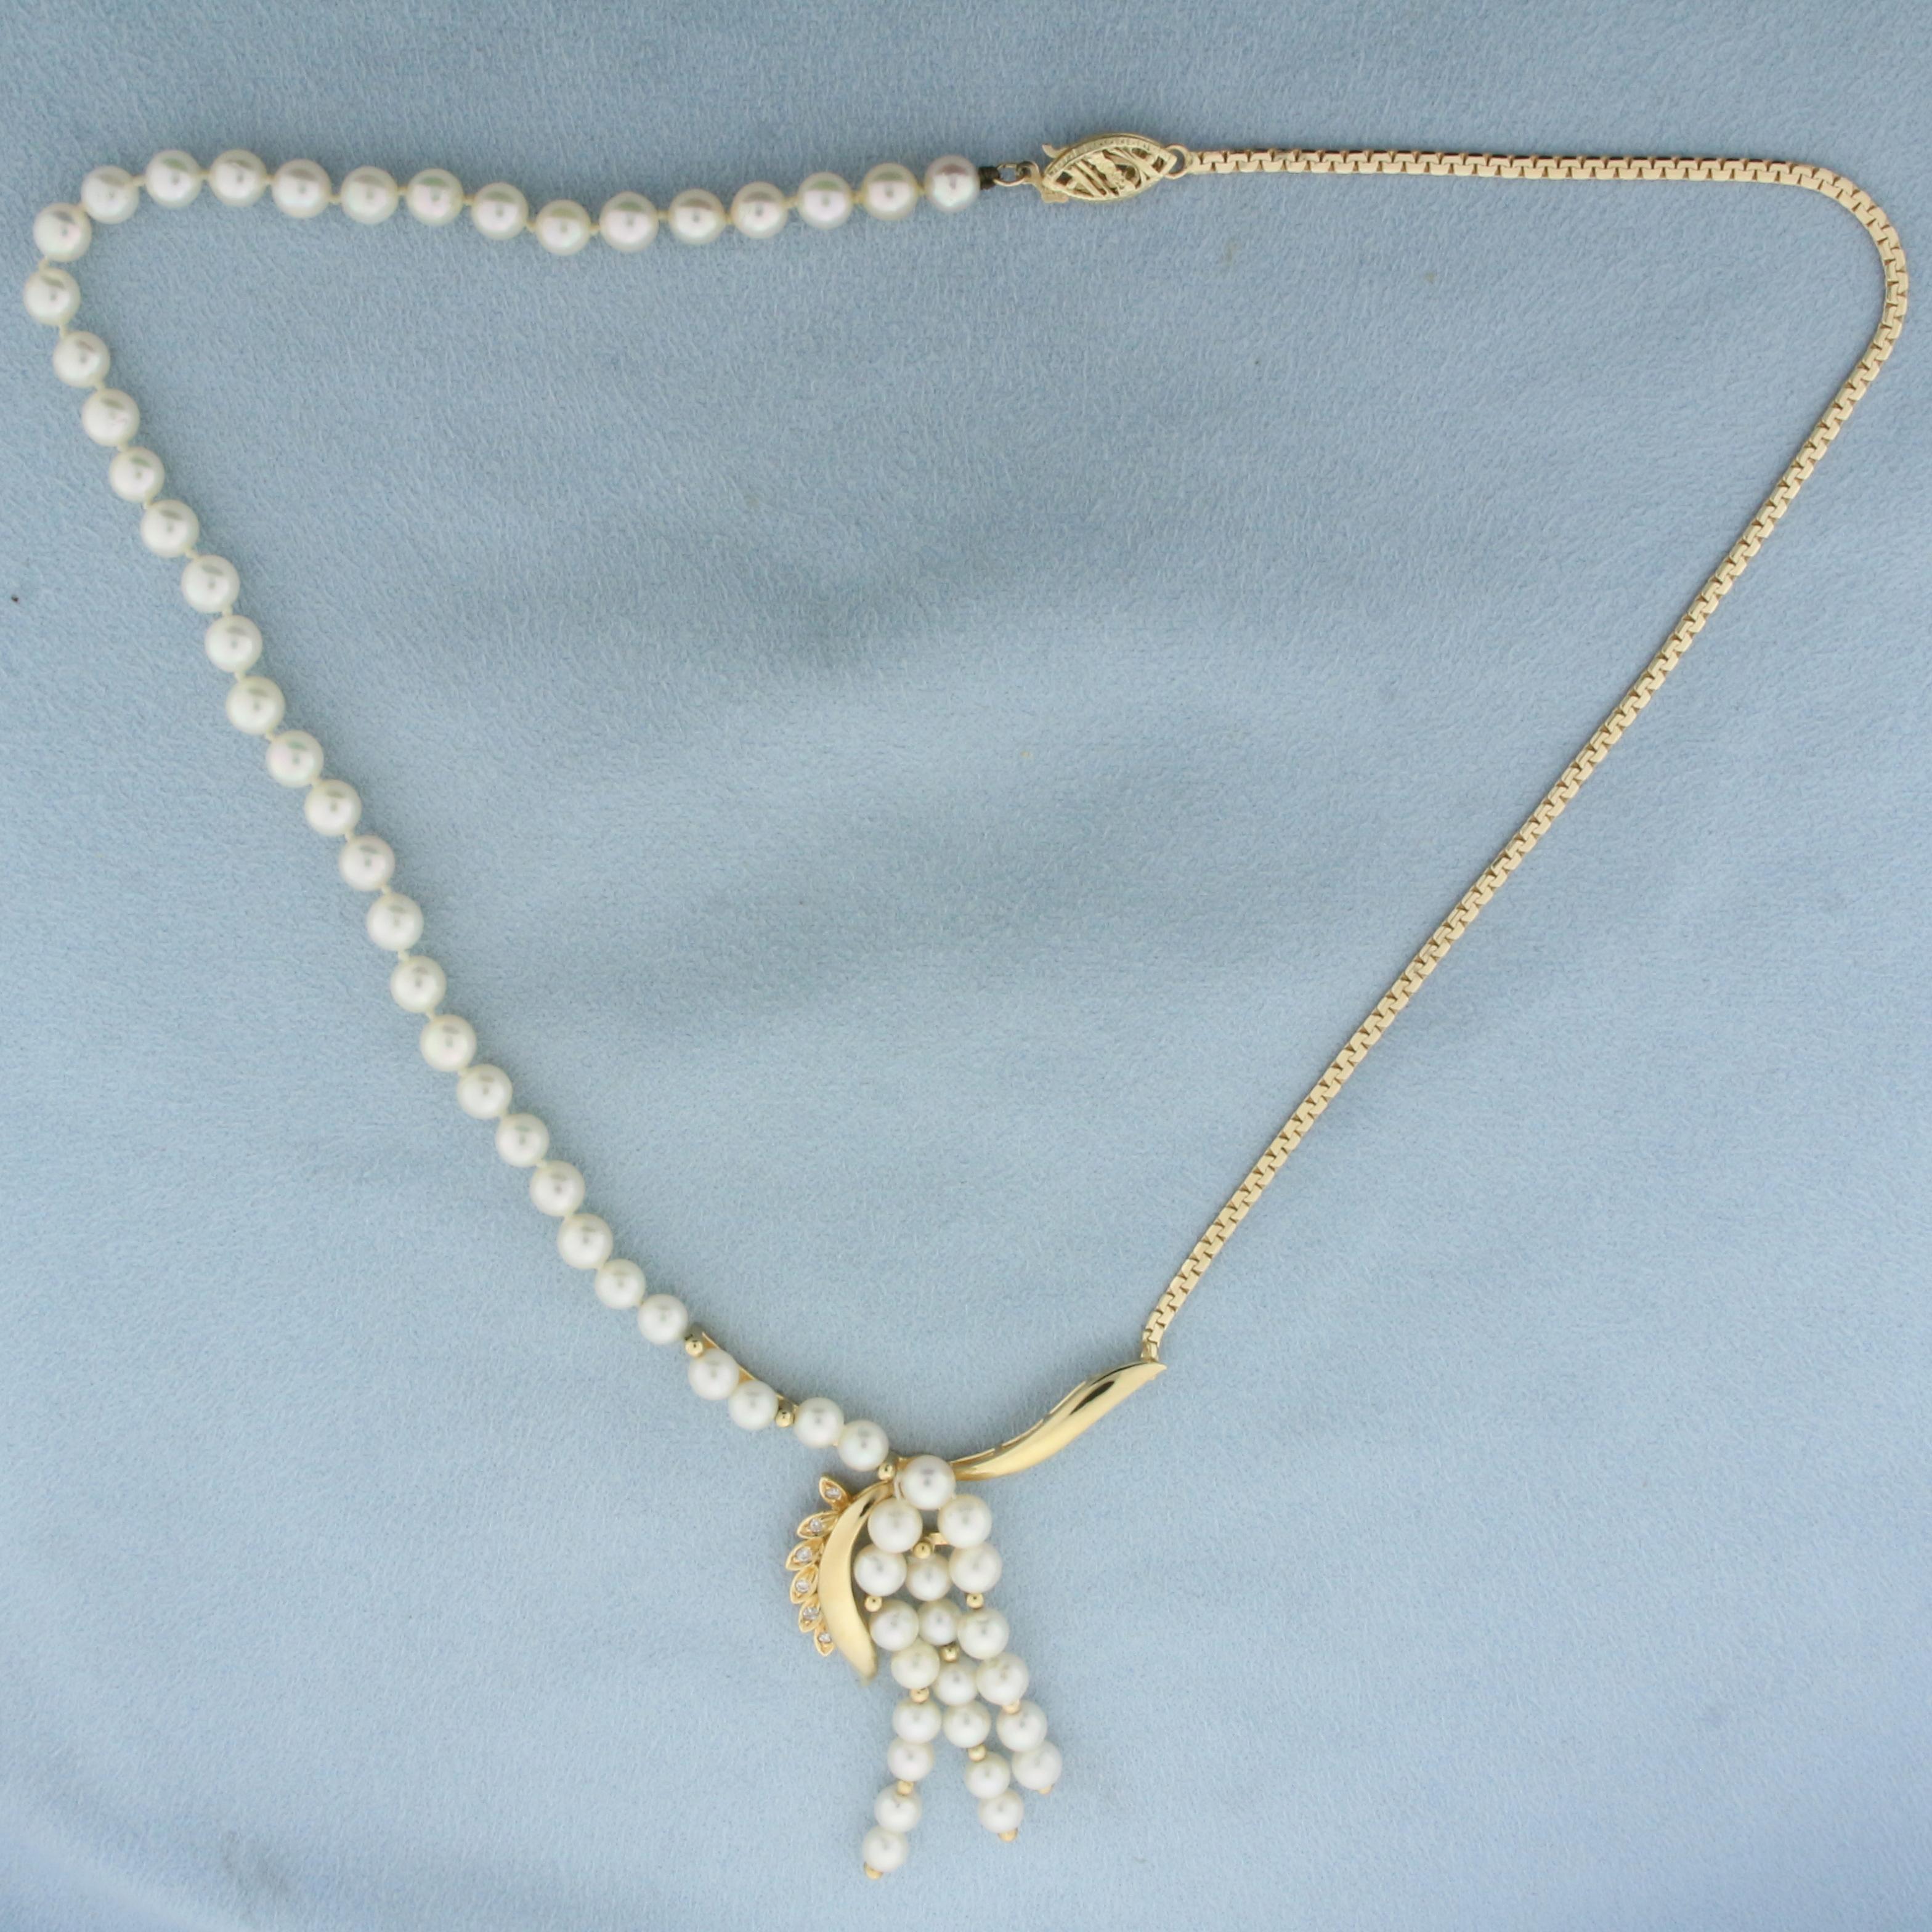 Designer Pearl And Diamond Necklace In 14k Yellow Gold